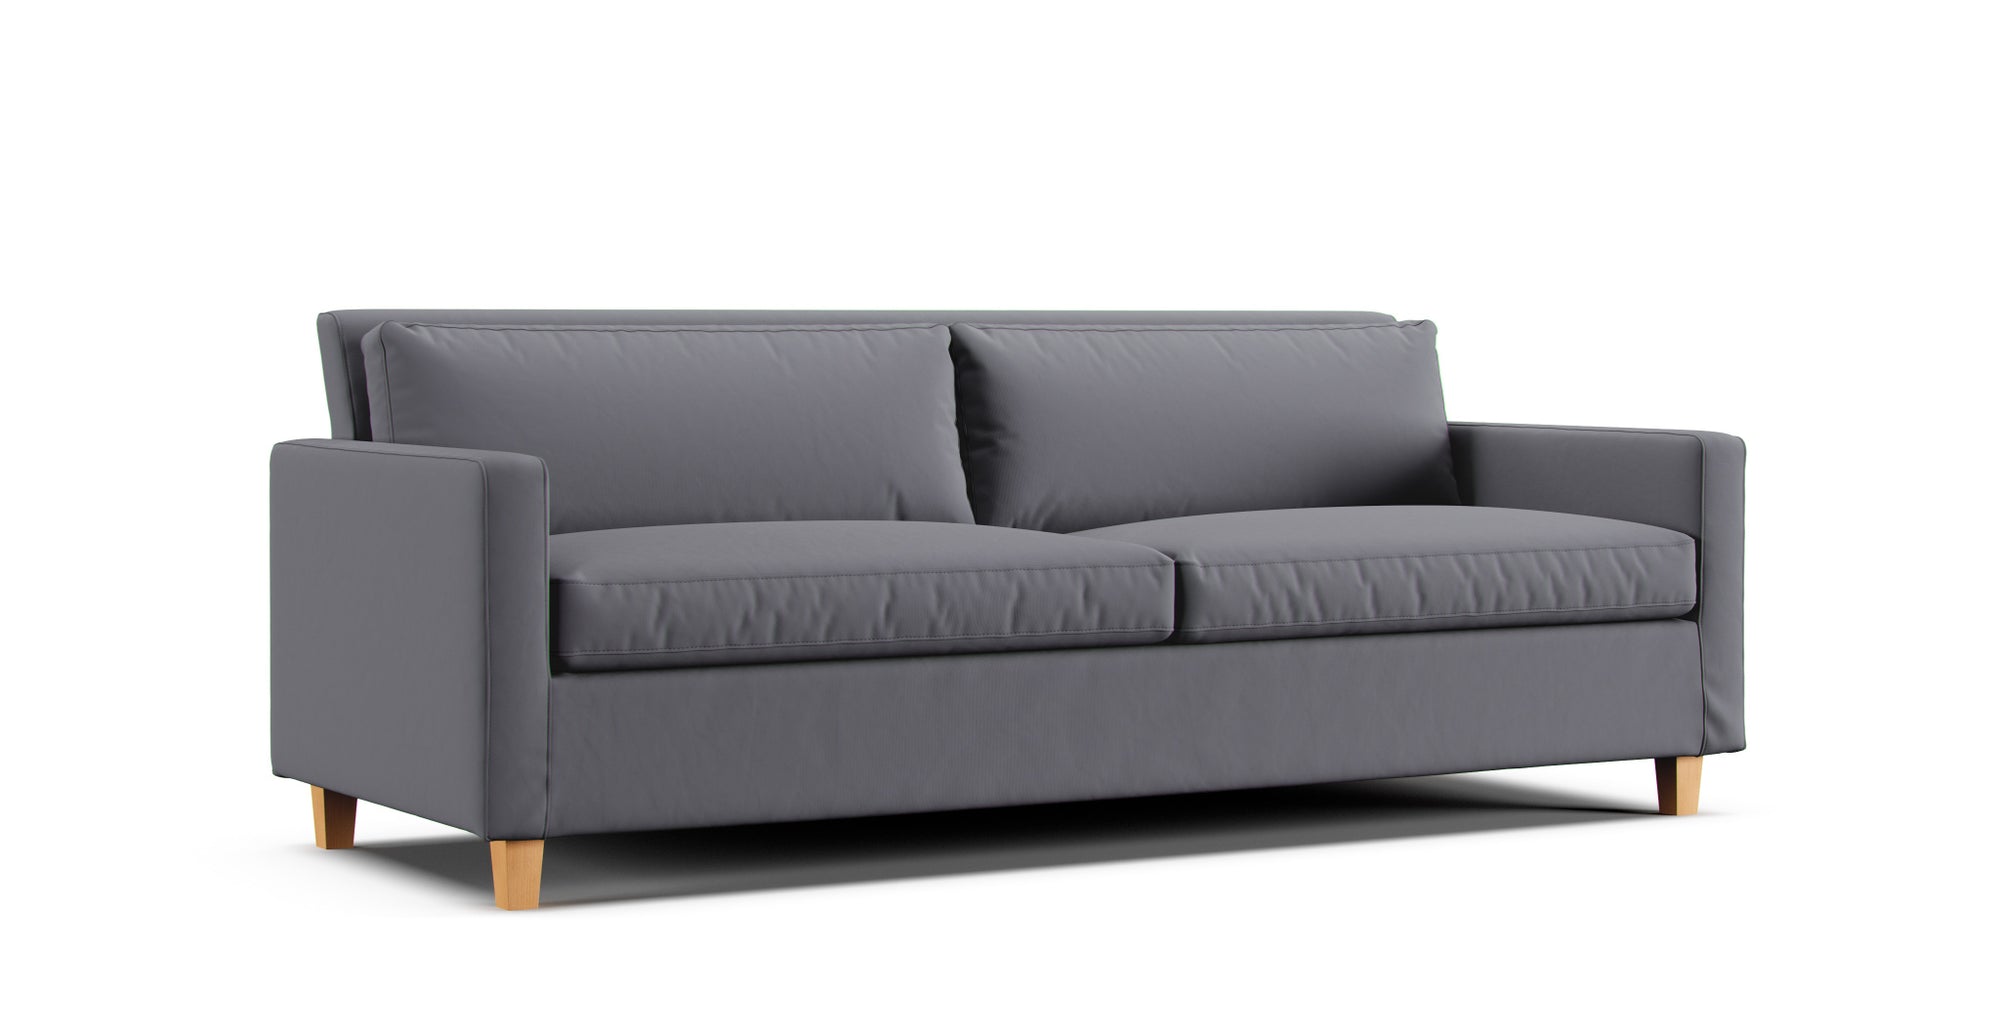 Habitat Chester sofa featuring a machine washable charcoal Cotton Canvas slipcover for easy maintenance